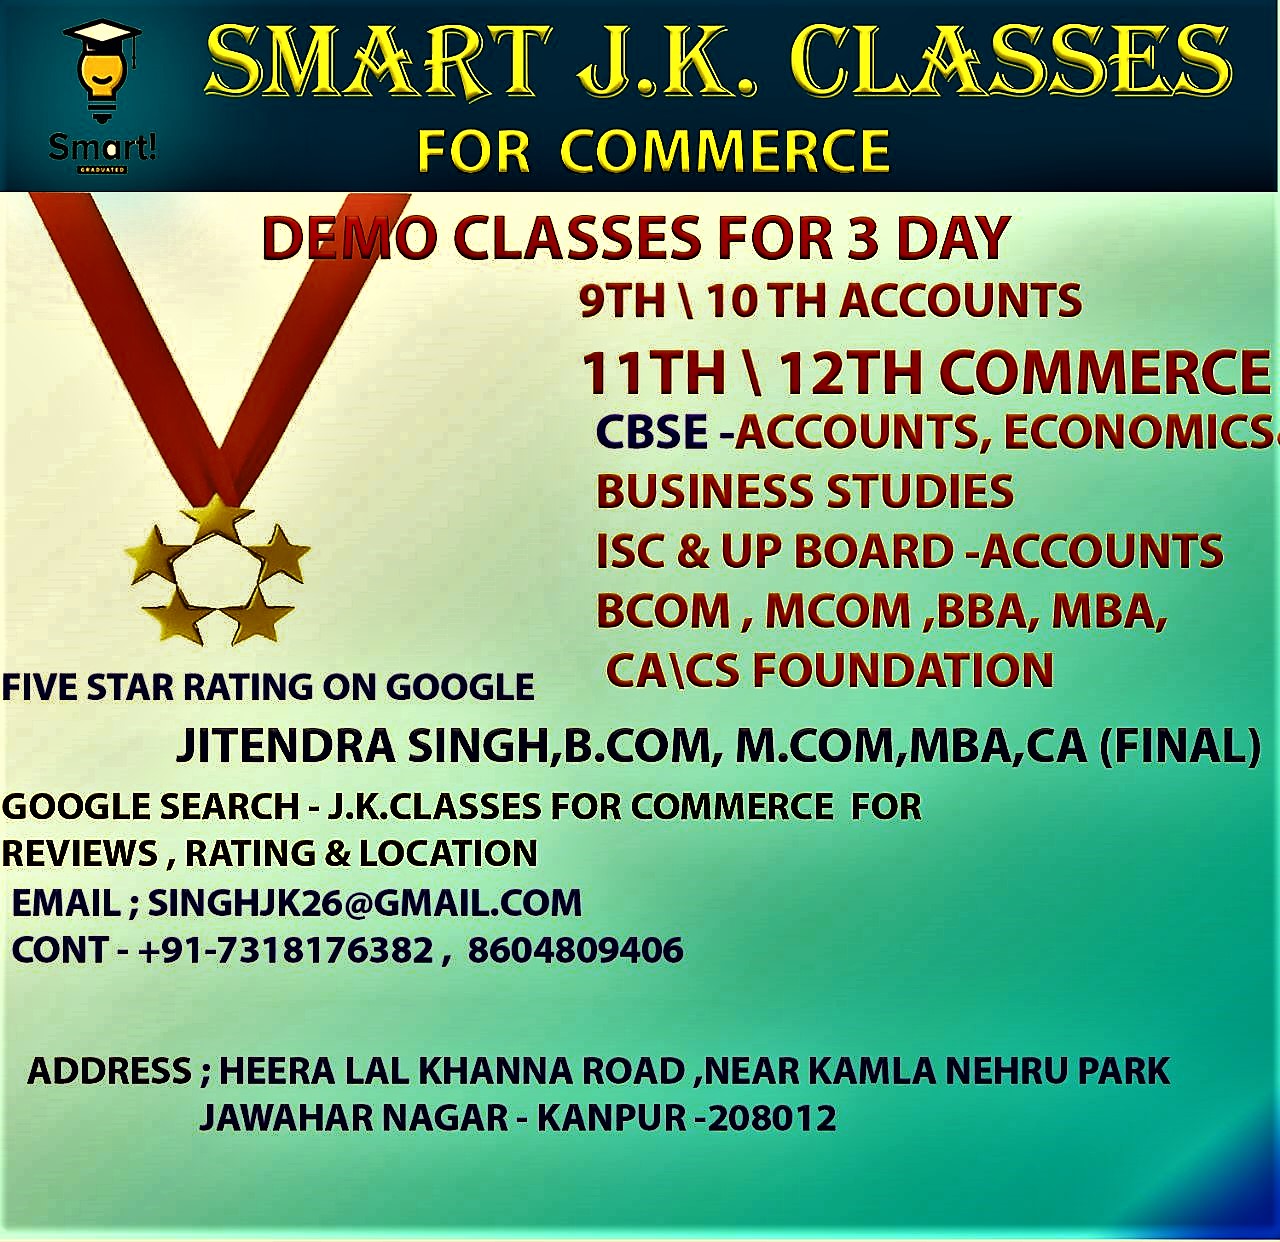 24097SMARTJK.CLASSES for COMMERCE
Class 11th Accountancy